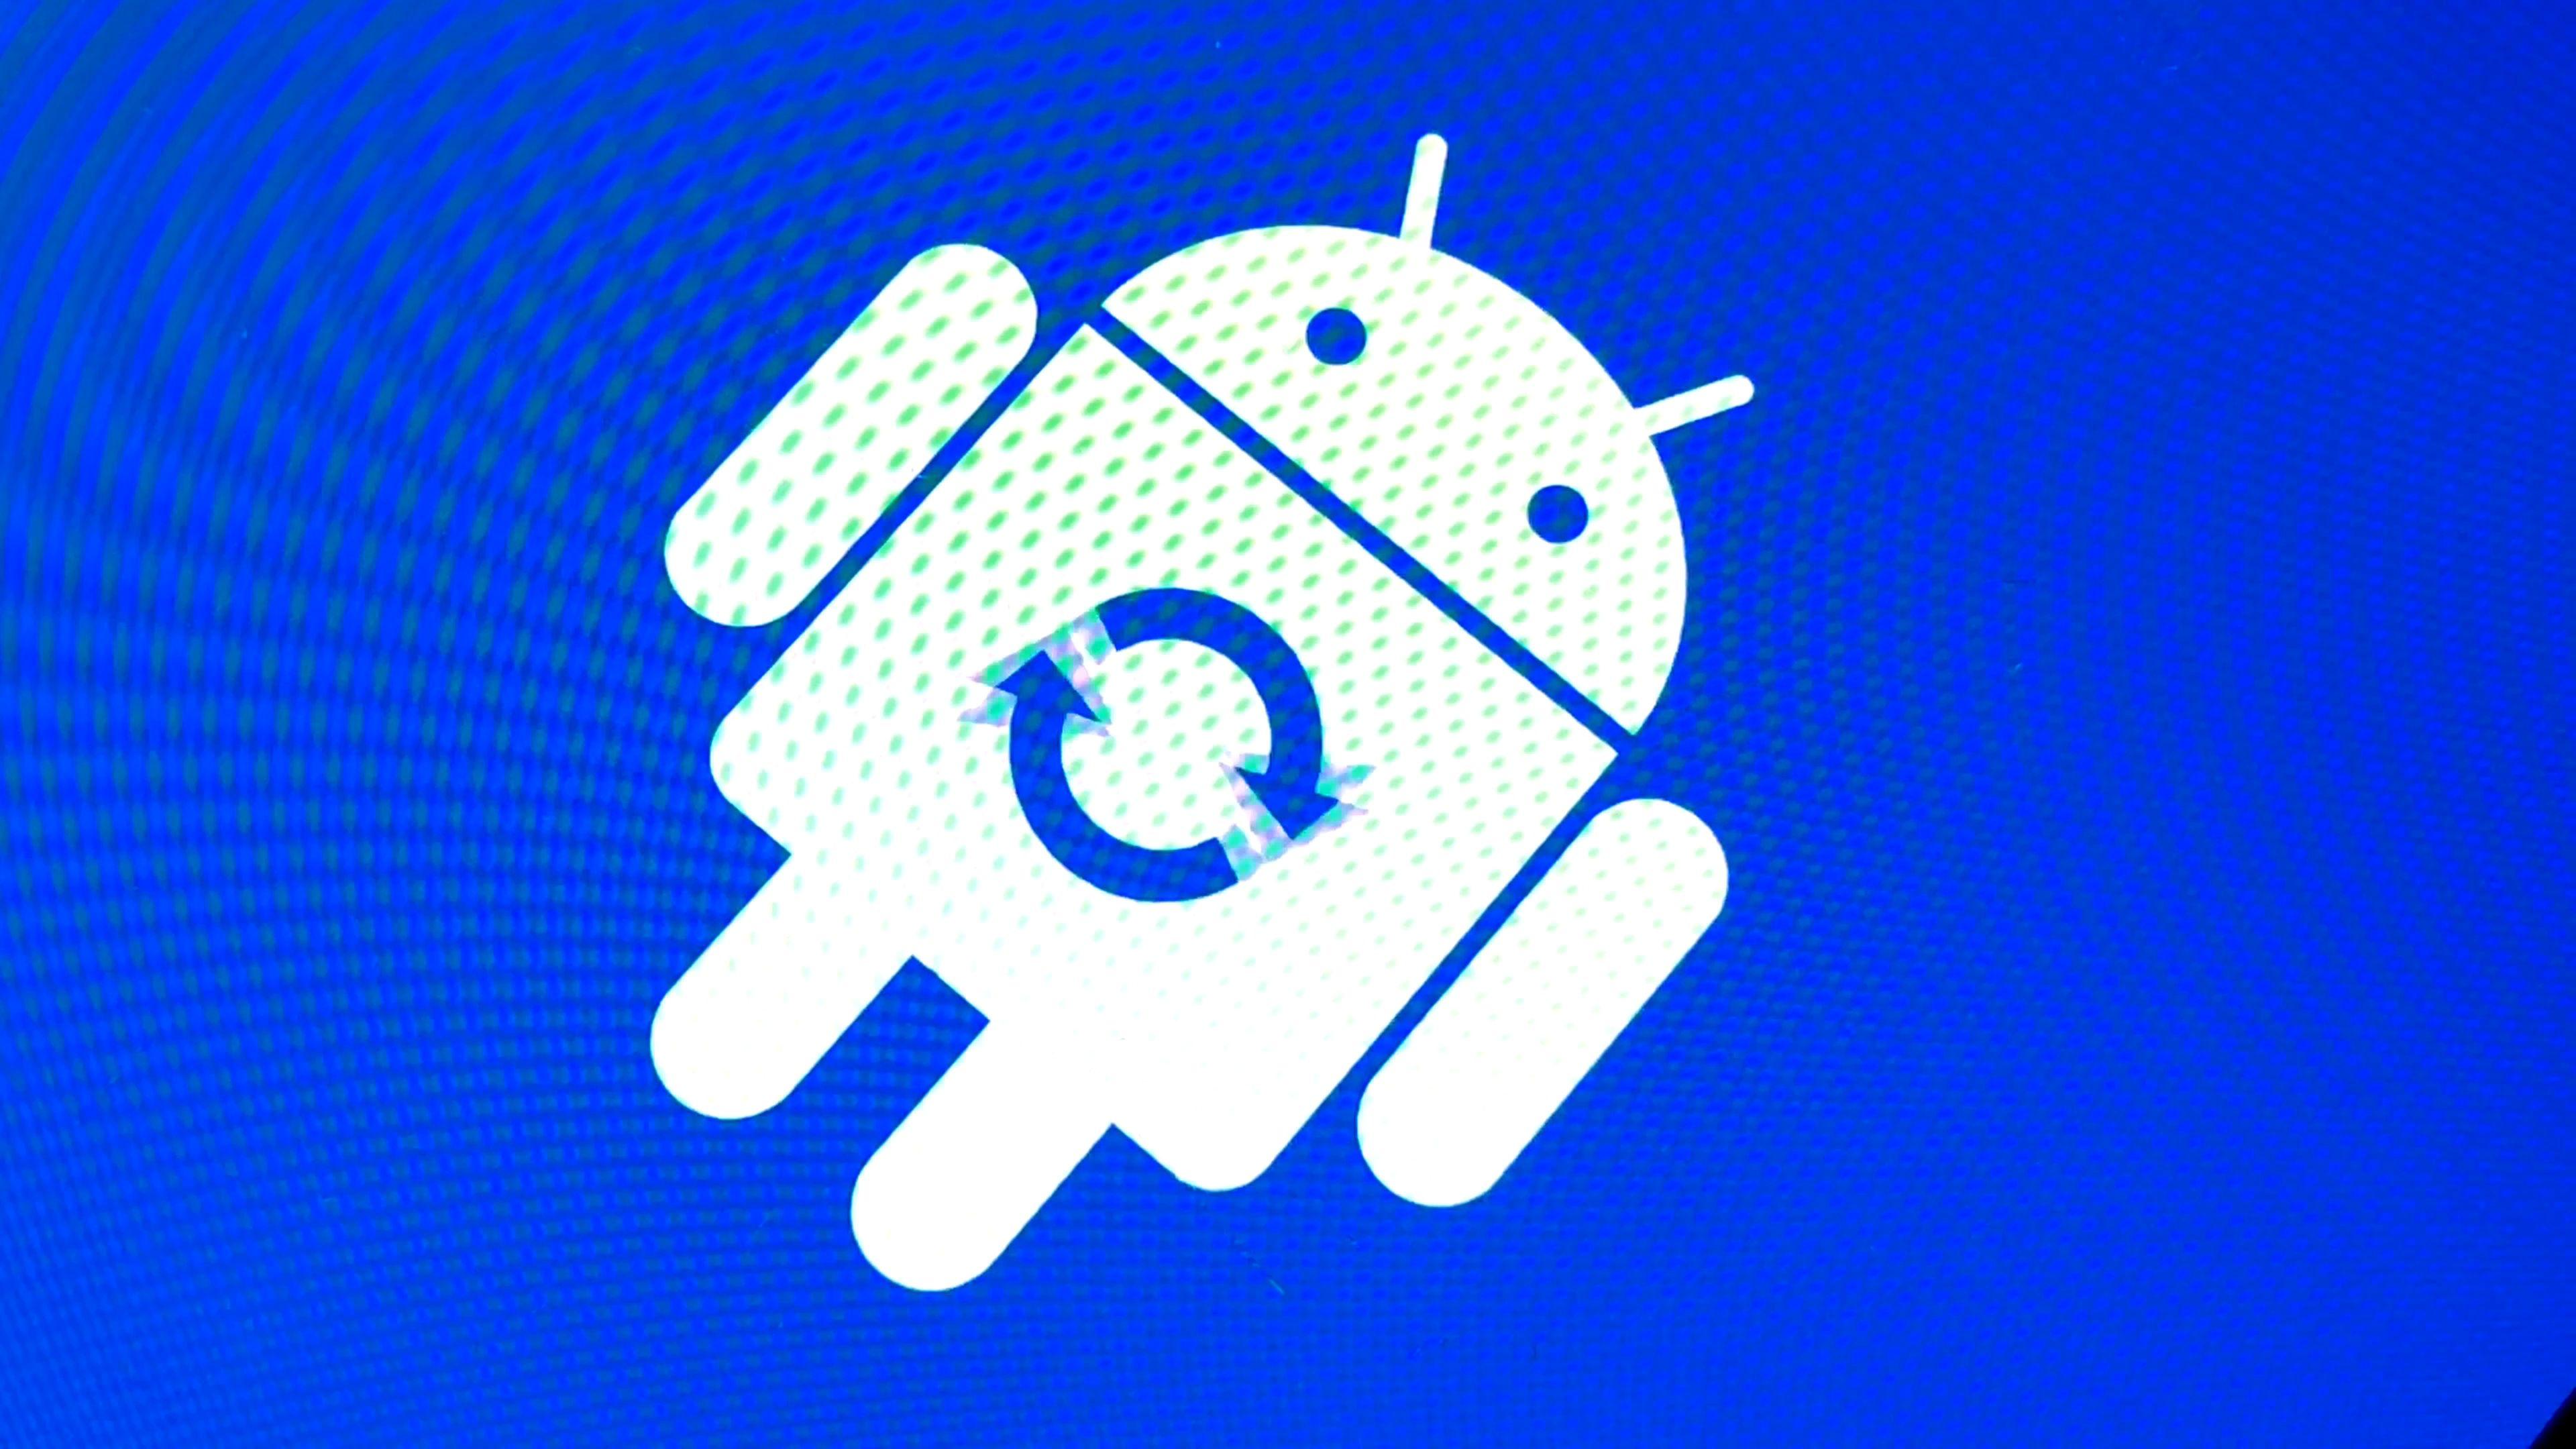 Android Robot Logo - Android robot logo icon on the smart phone screen during update ...